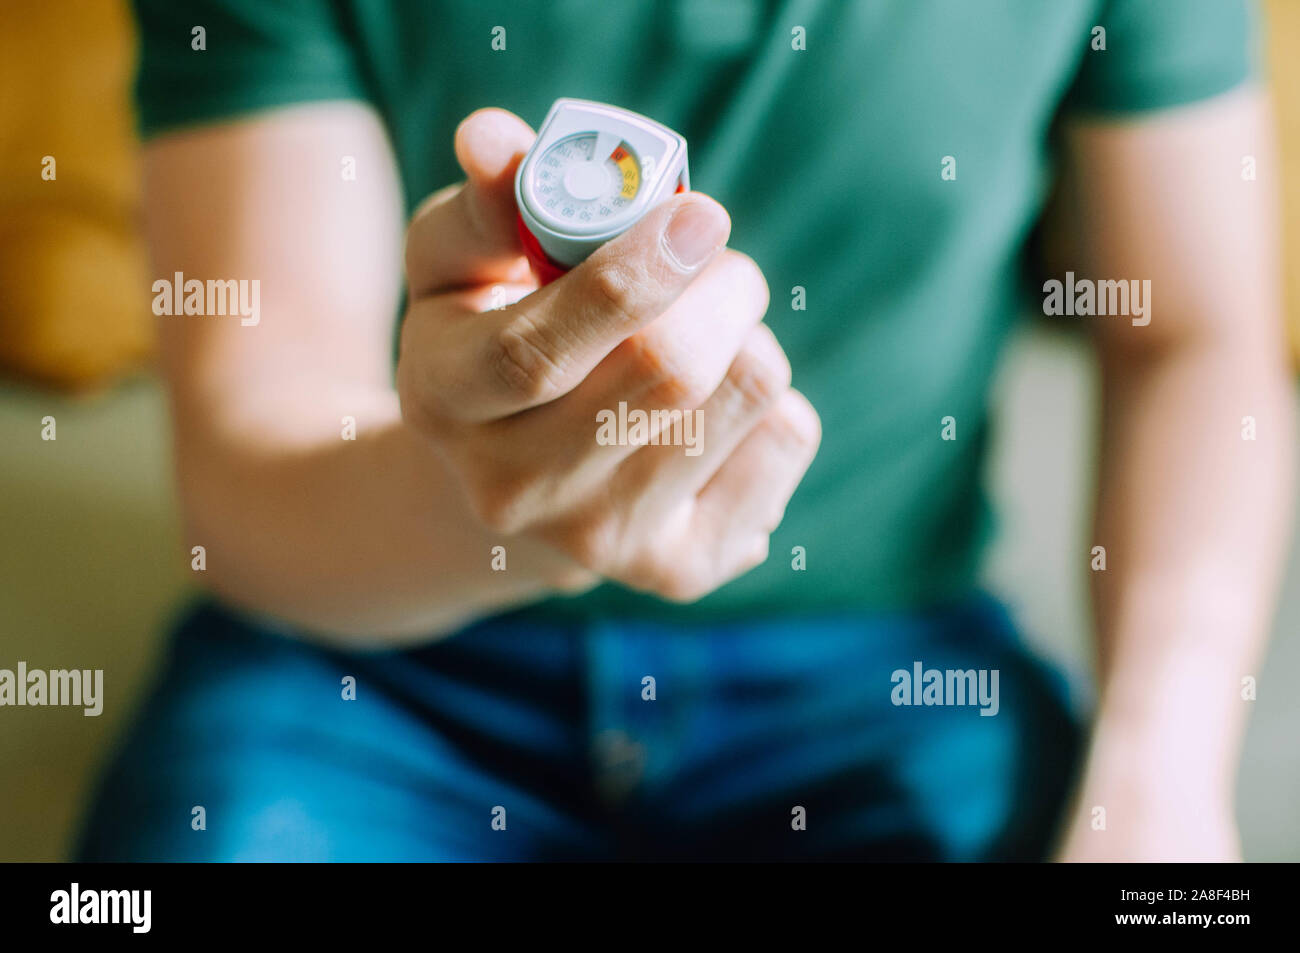 A young man is holding an asthma inhaler device while sitting on a couch Stock Photo